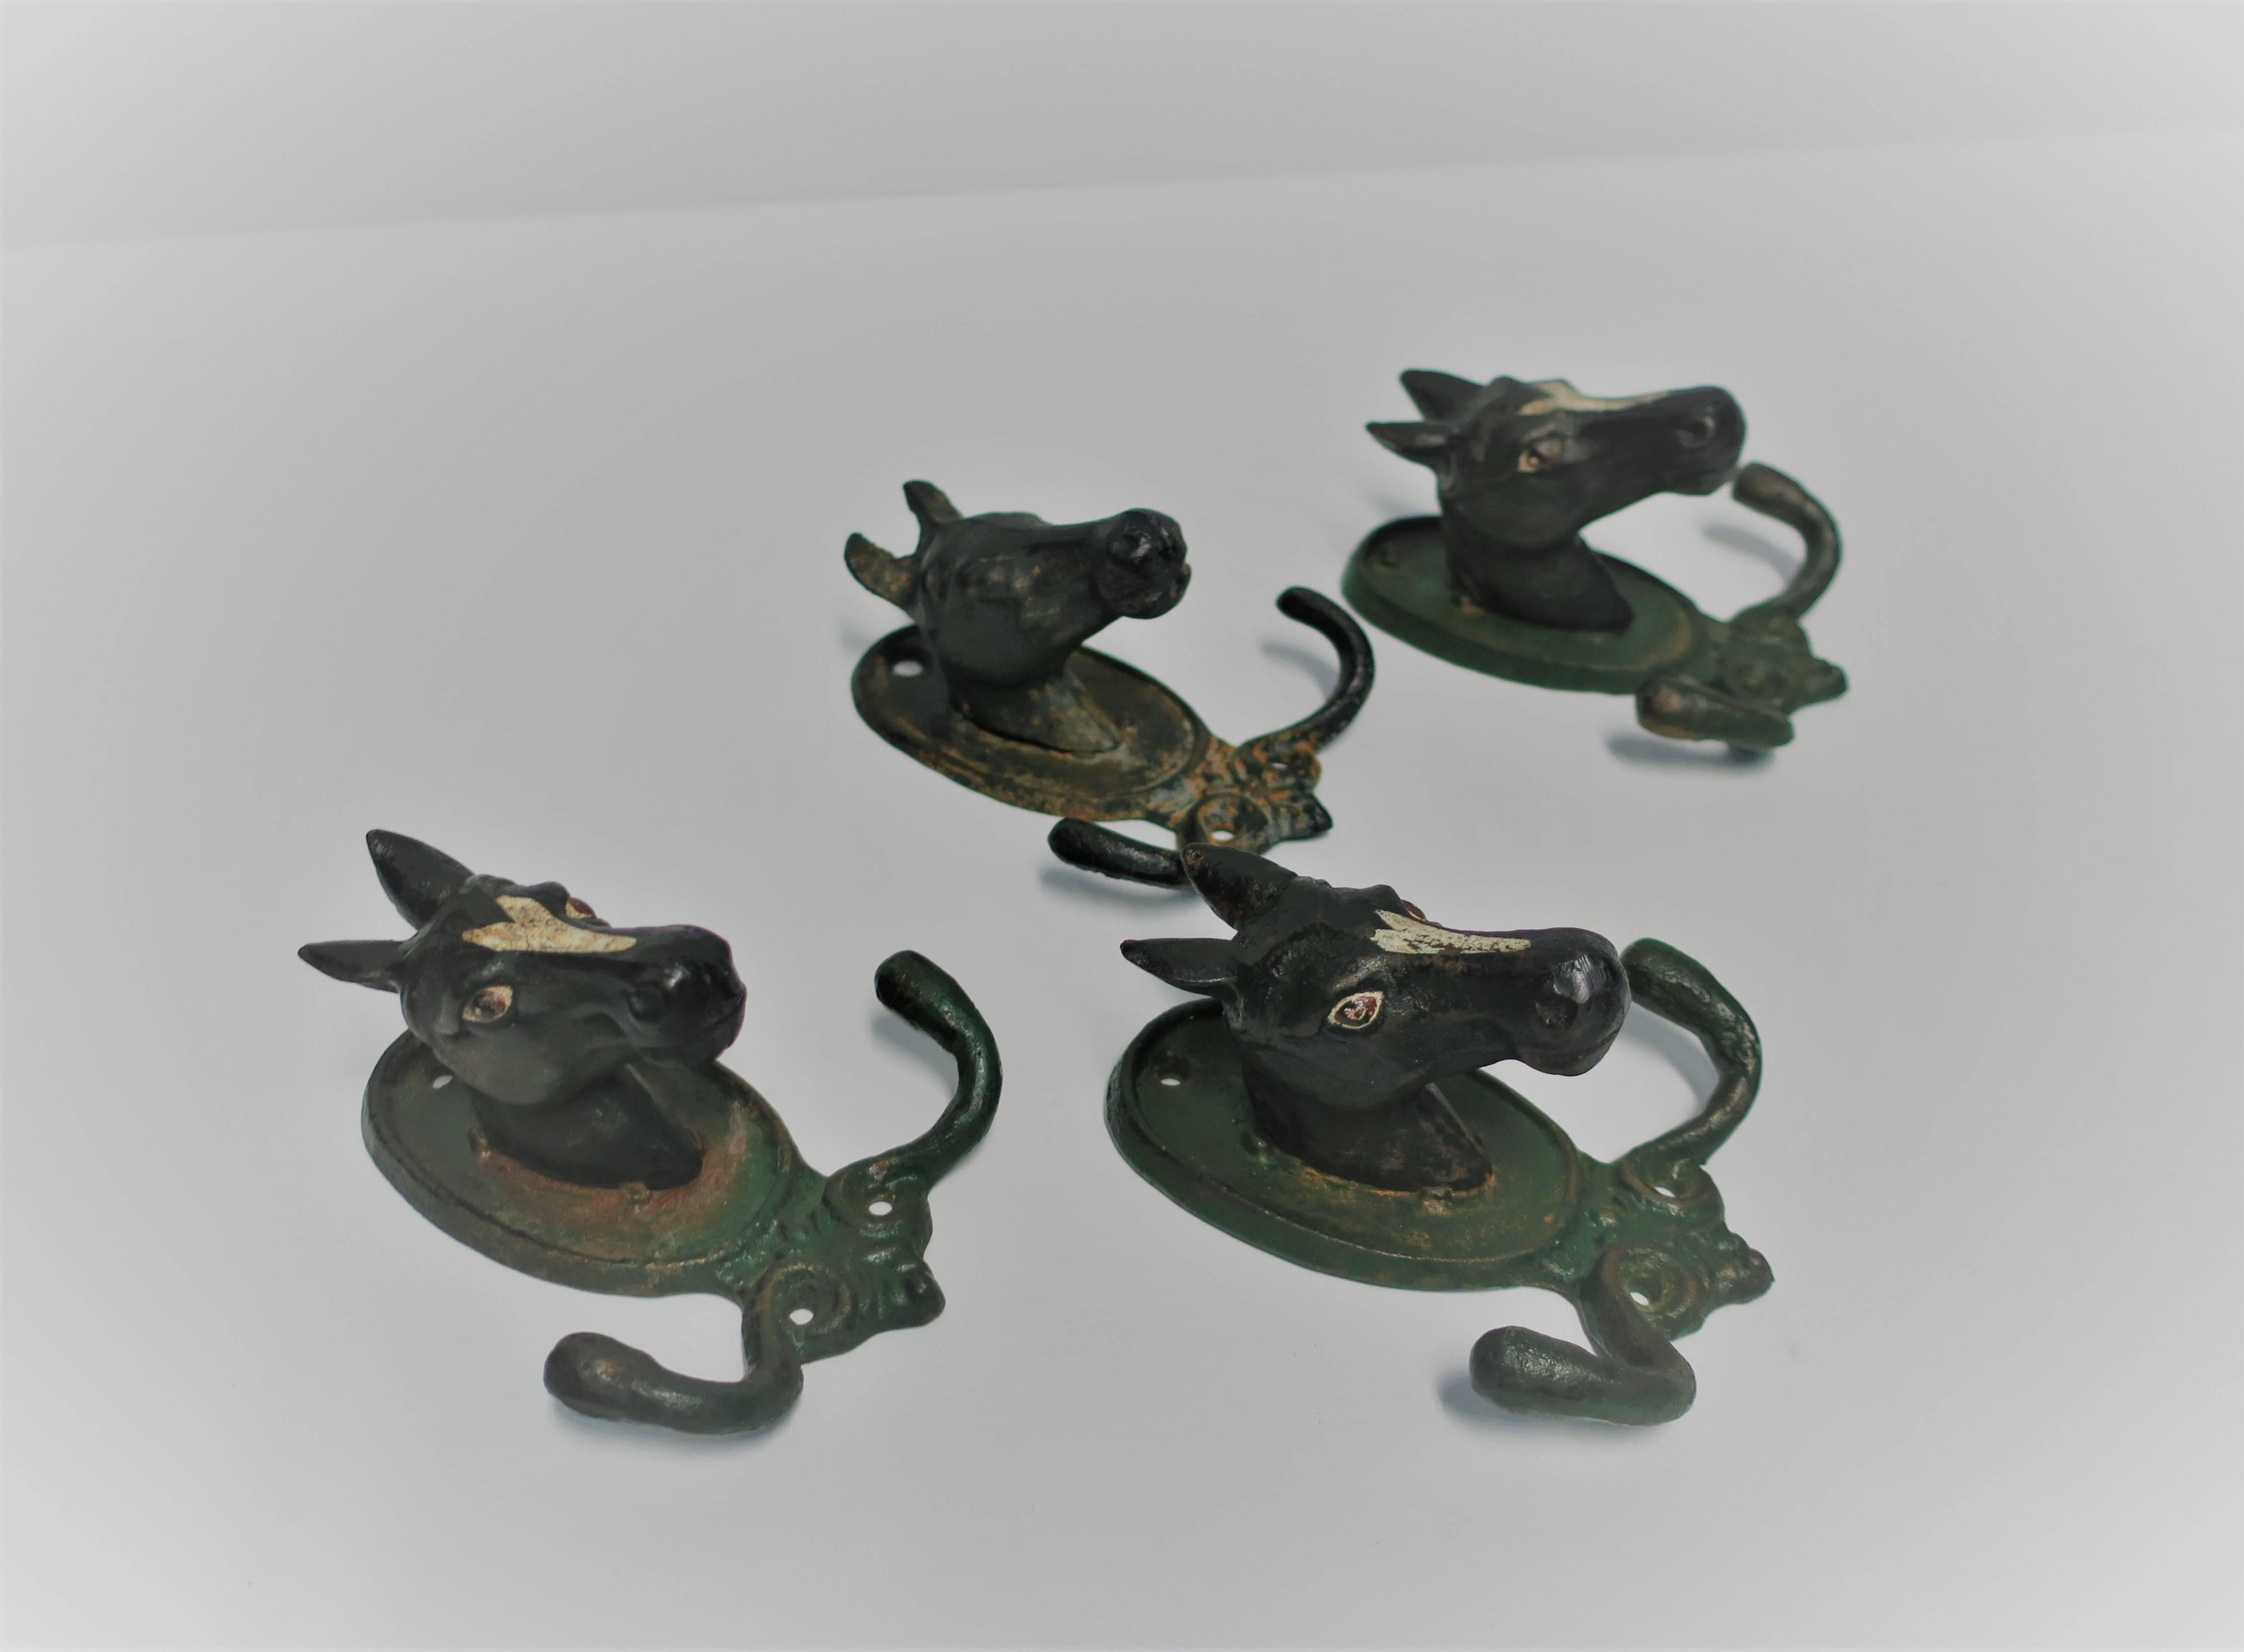 Hand-Painted Set of Four Vintage Horse or Equine Iron Hardware Wall Hooks